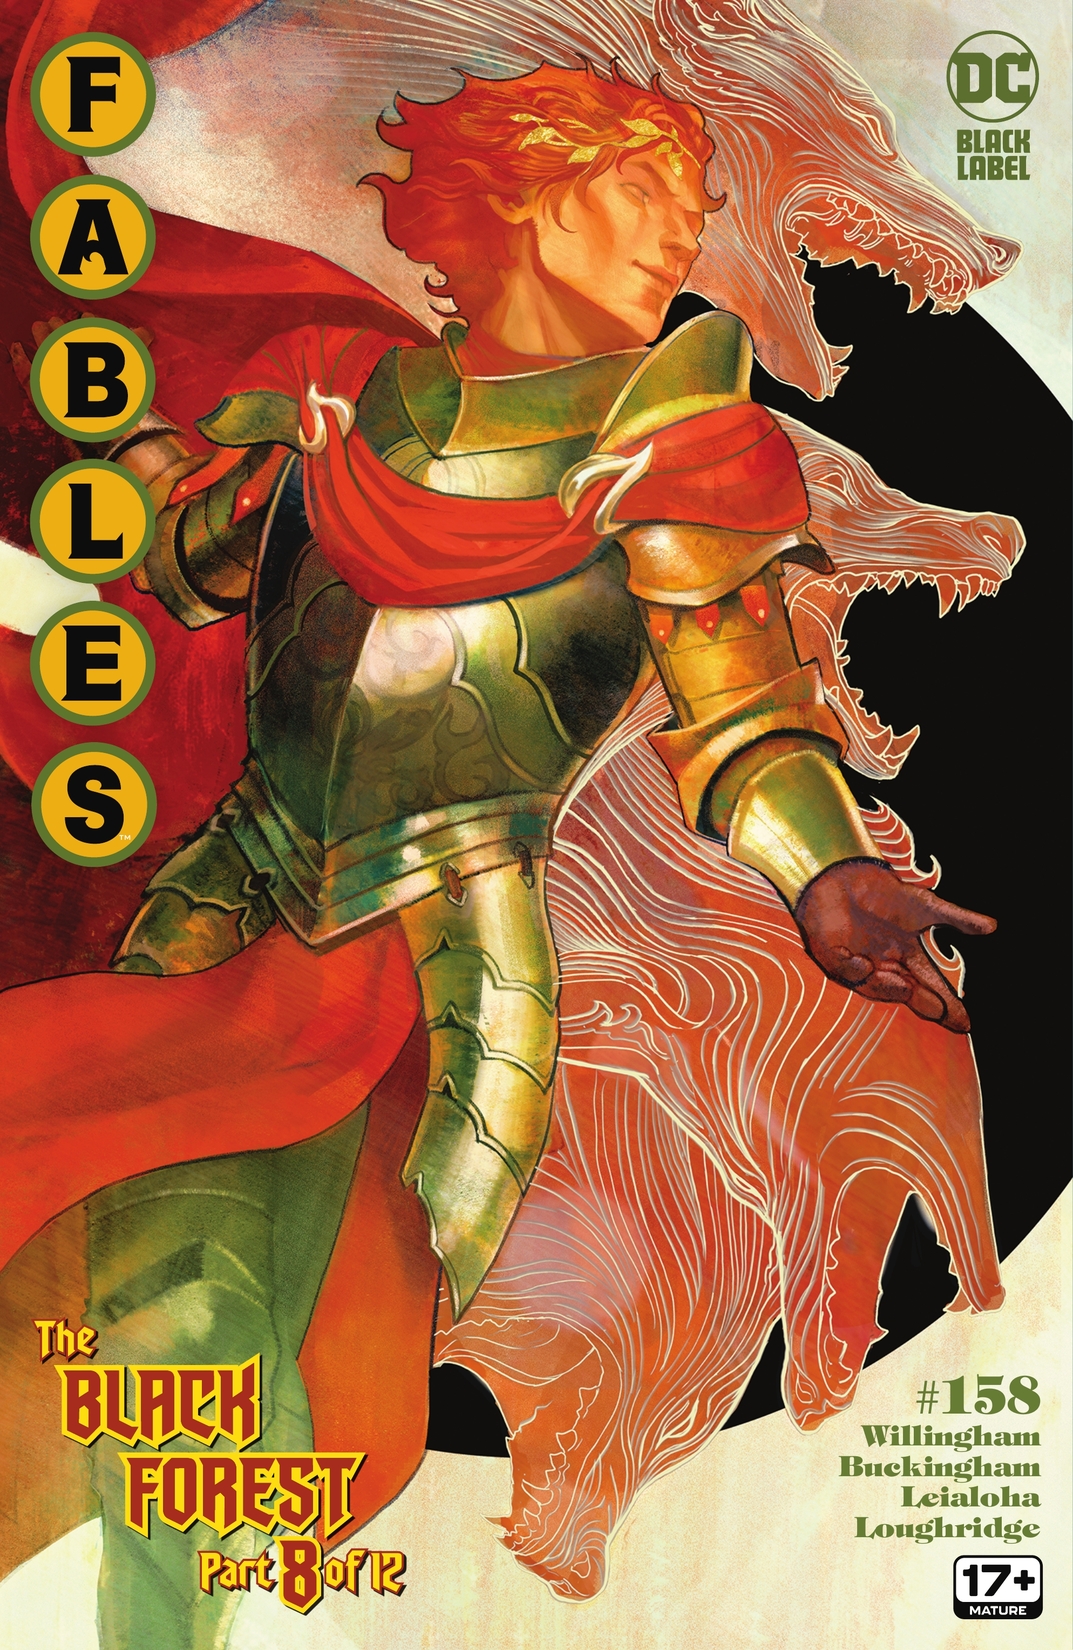 Fables #158 preview images